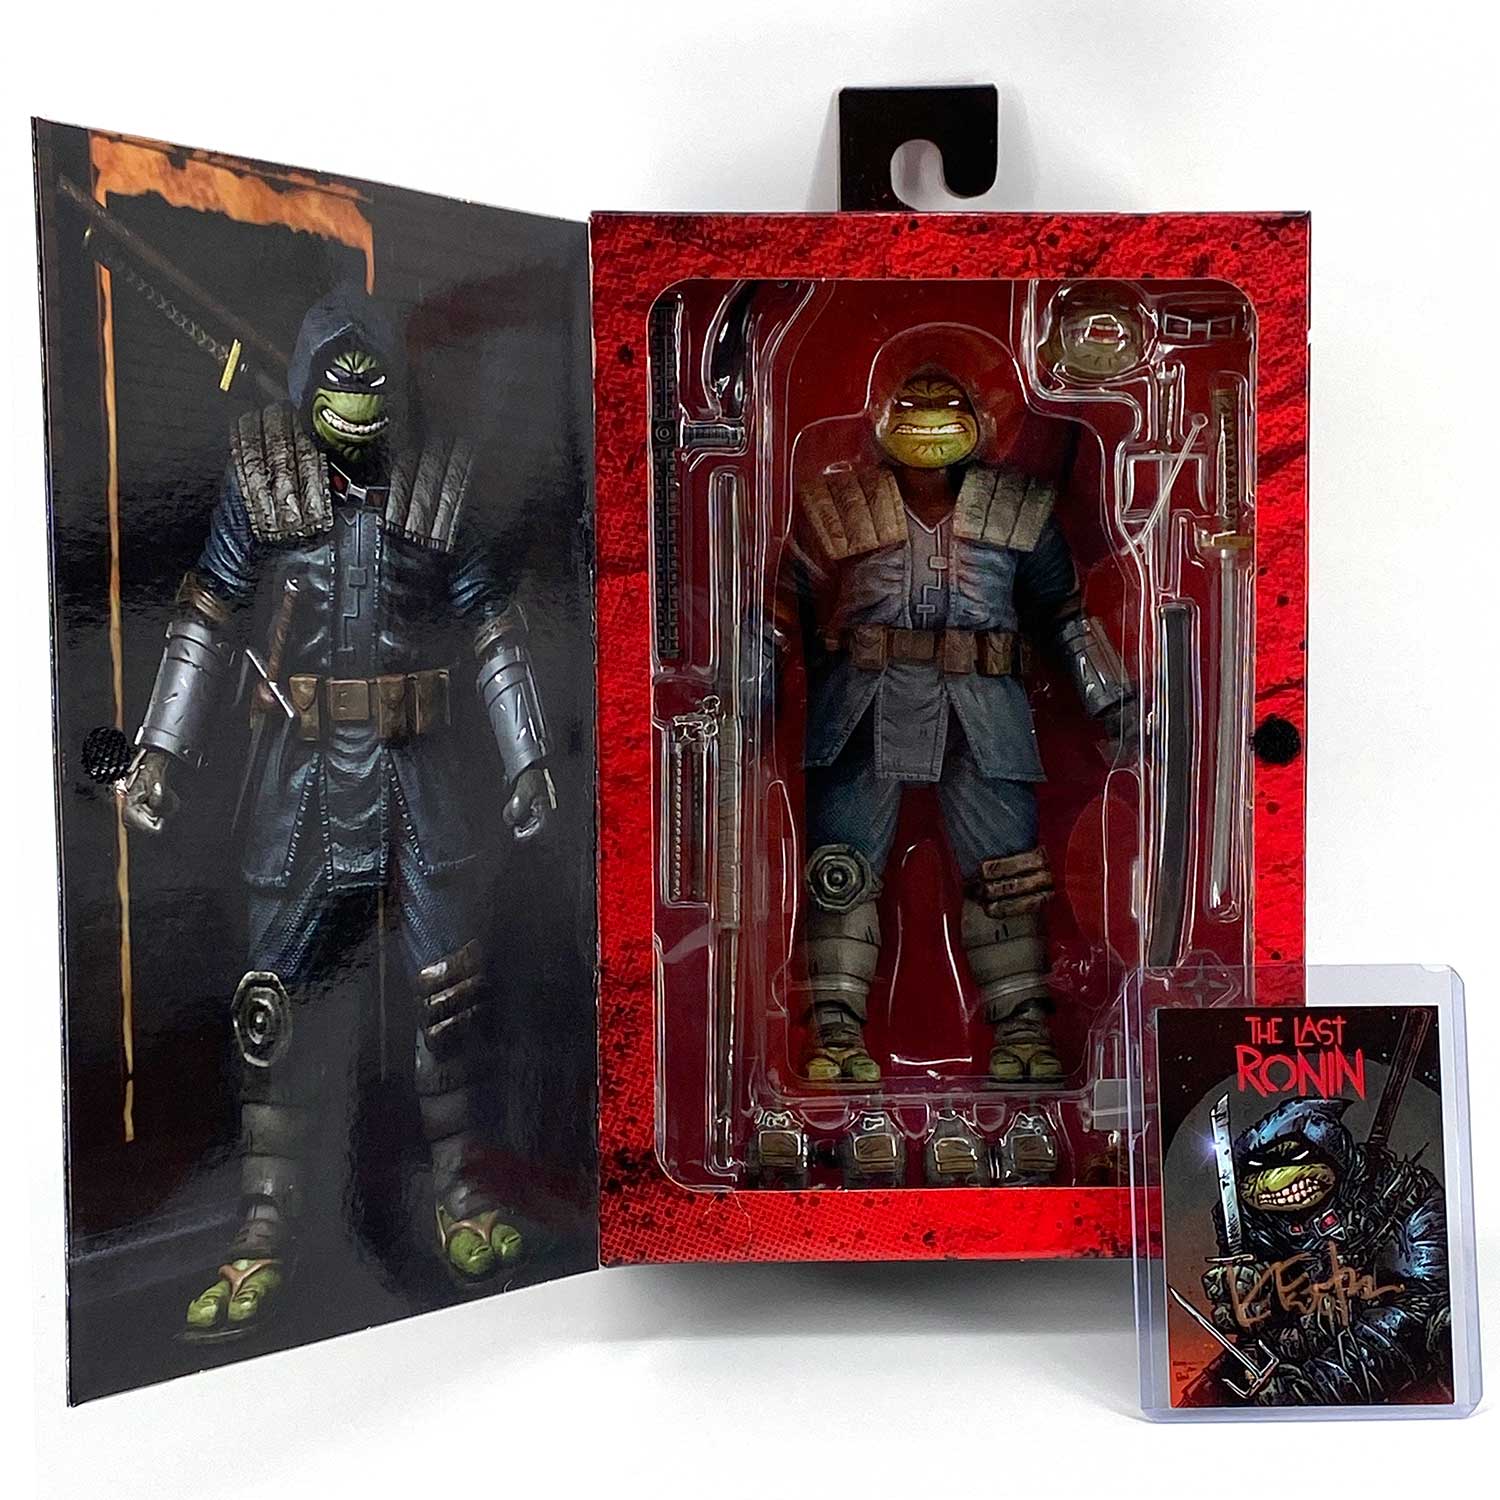 Read more about the article Even More New Stunning NECA Figures and Hand Signed Art Cards